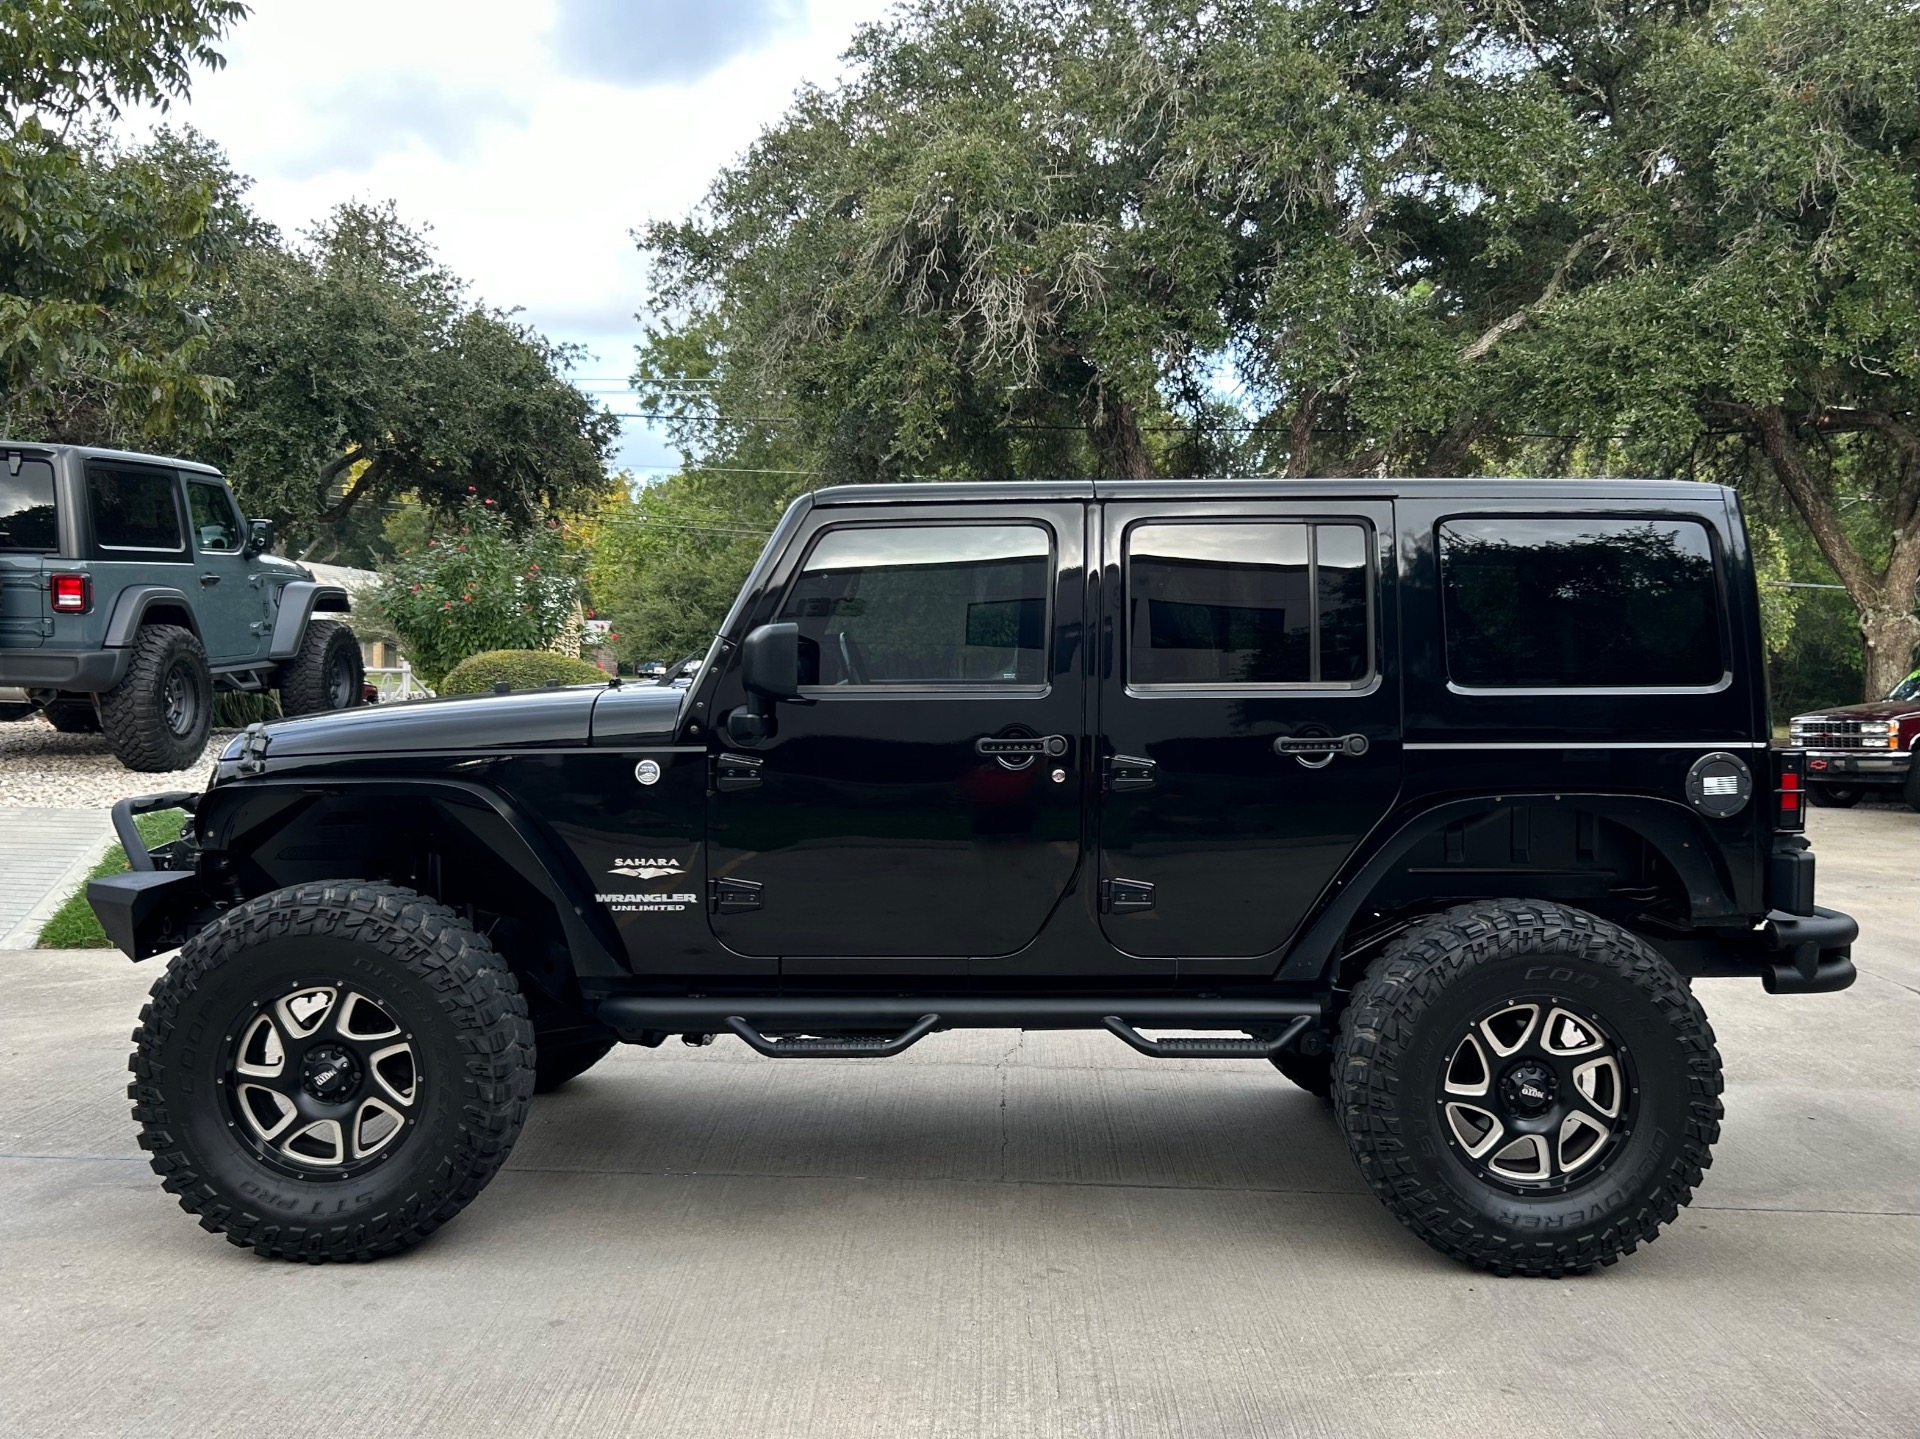 Used 2013 Jeep Wrangler Unlimited Sahara For Sale ($25,995) | Select ...